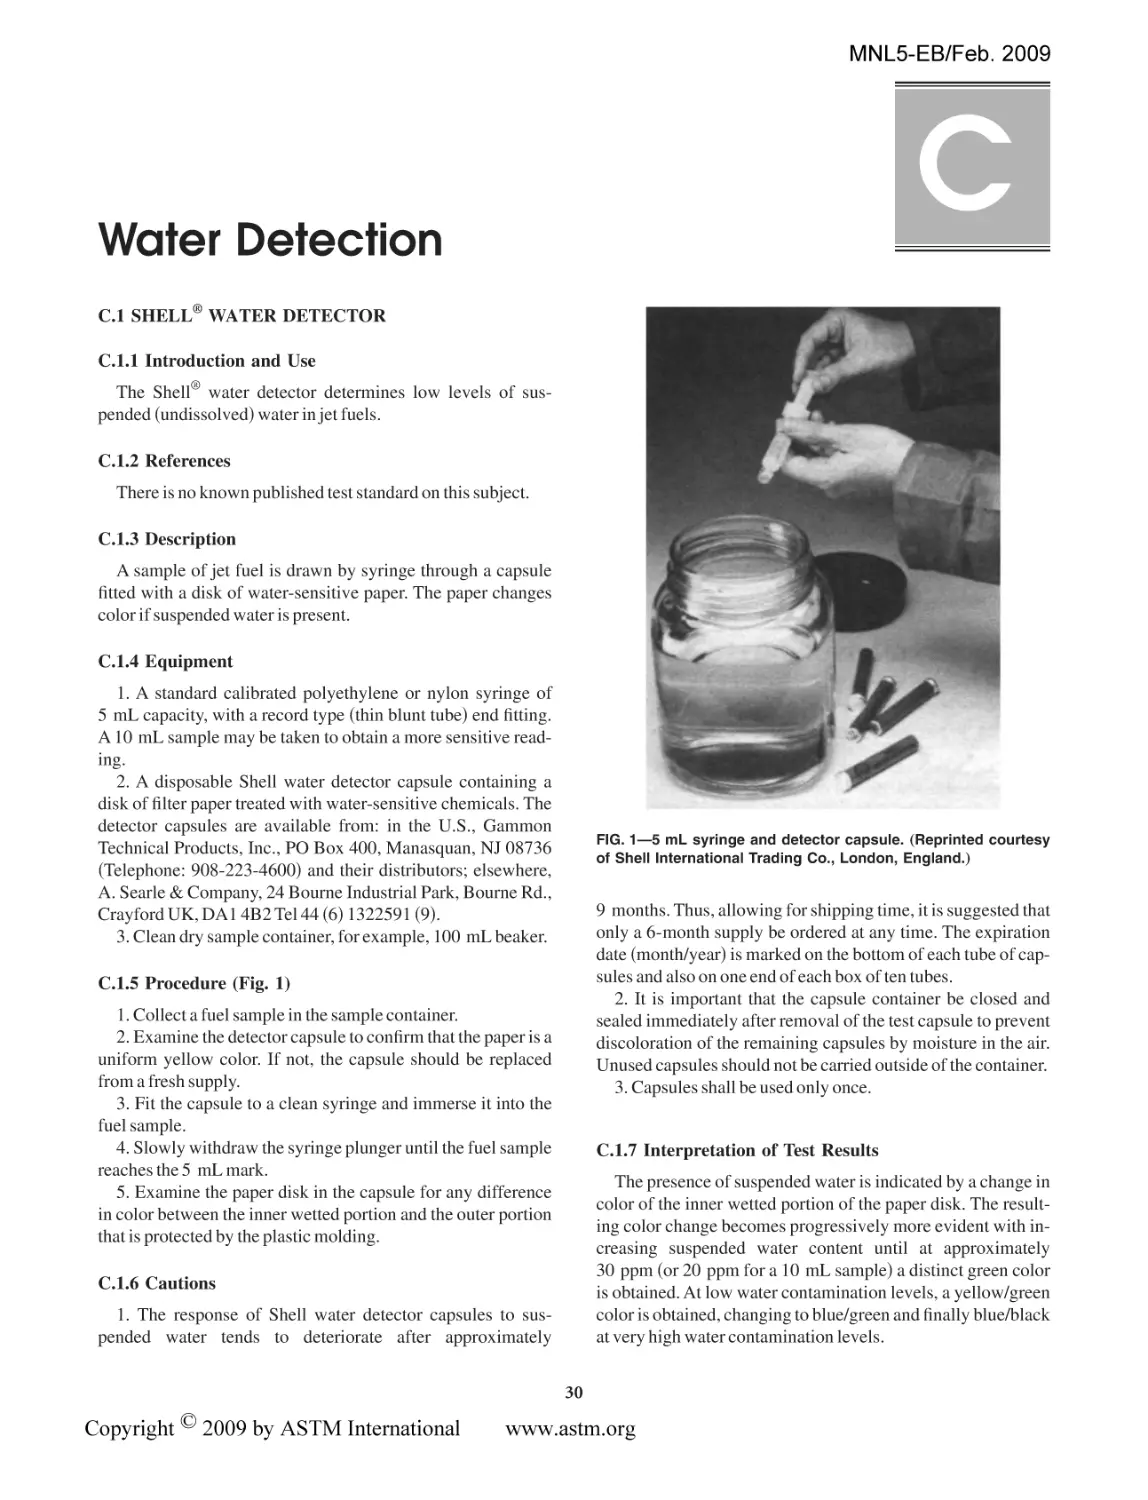 Water Detection